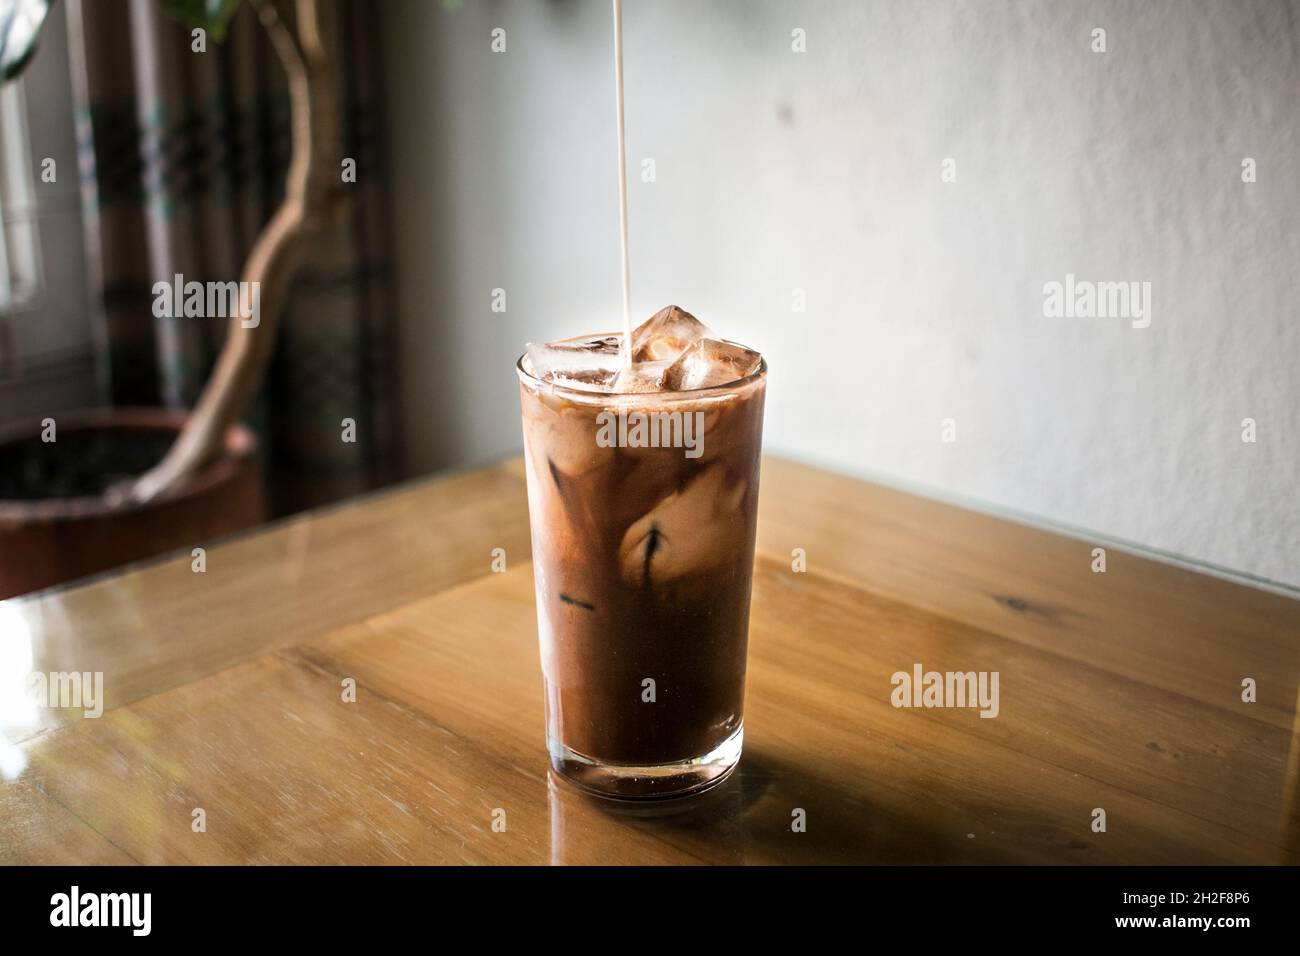 Delicious Iced coffee on brown wooden table Stock Photo